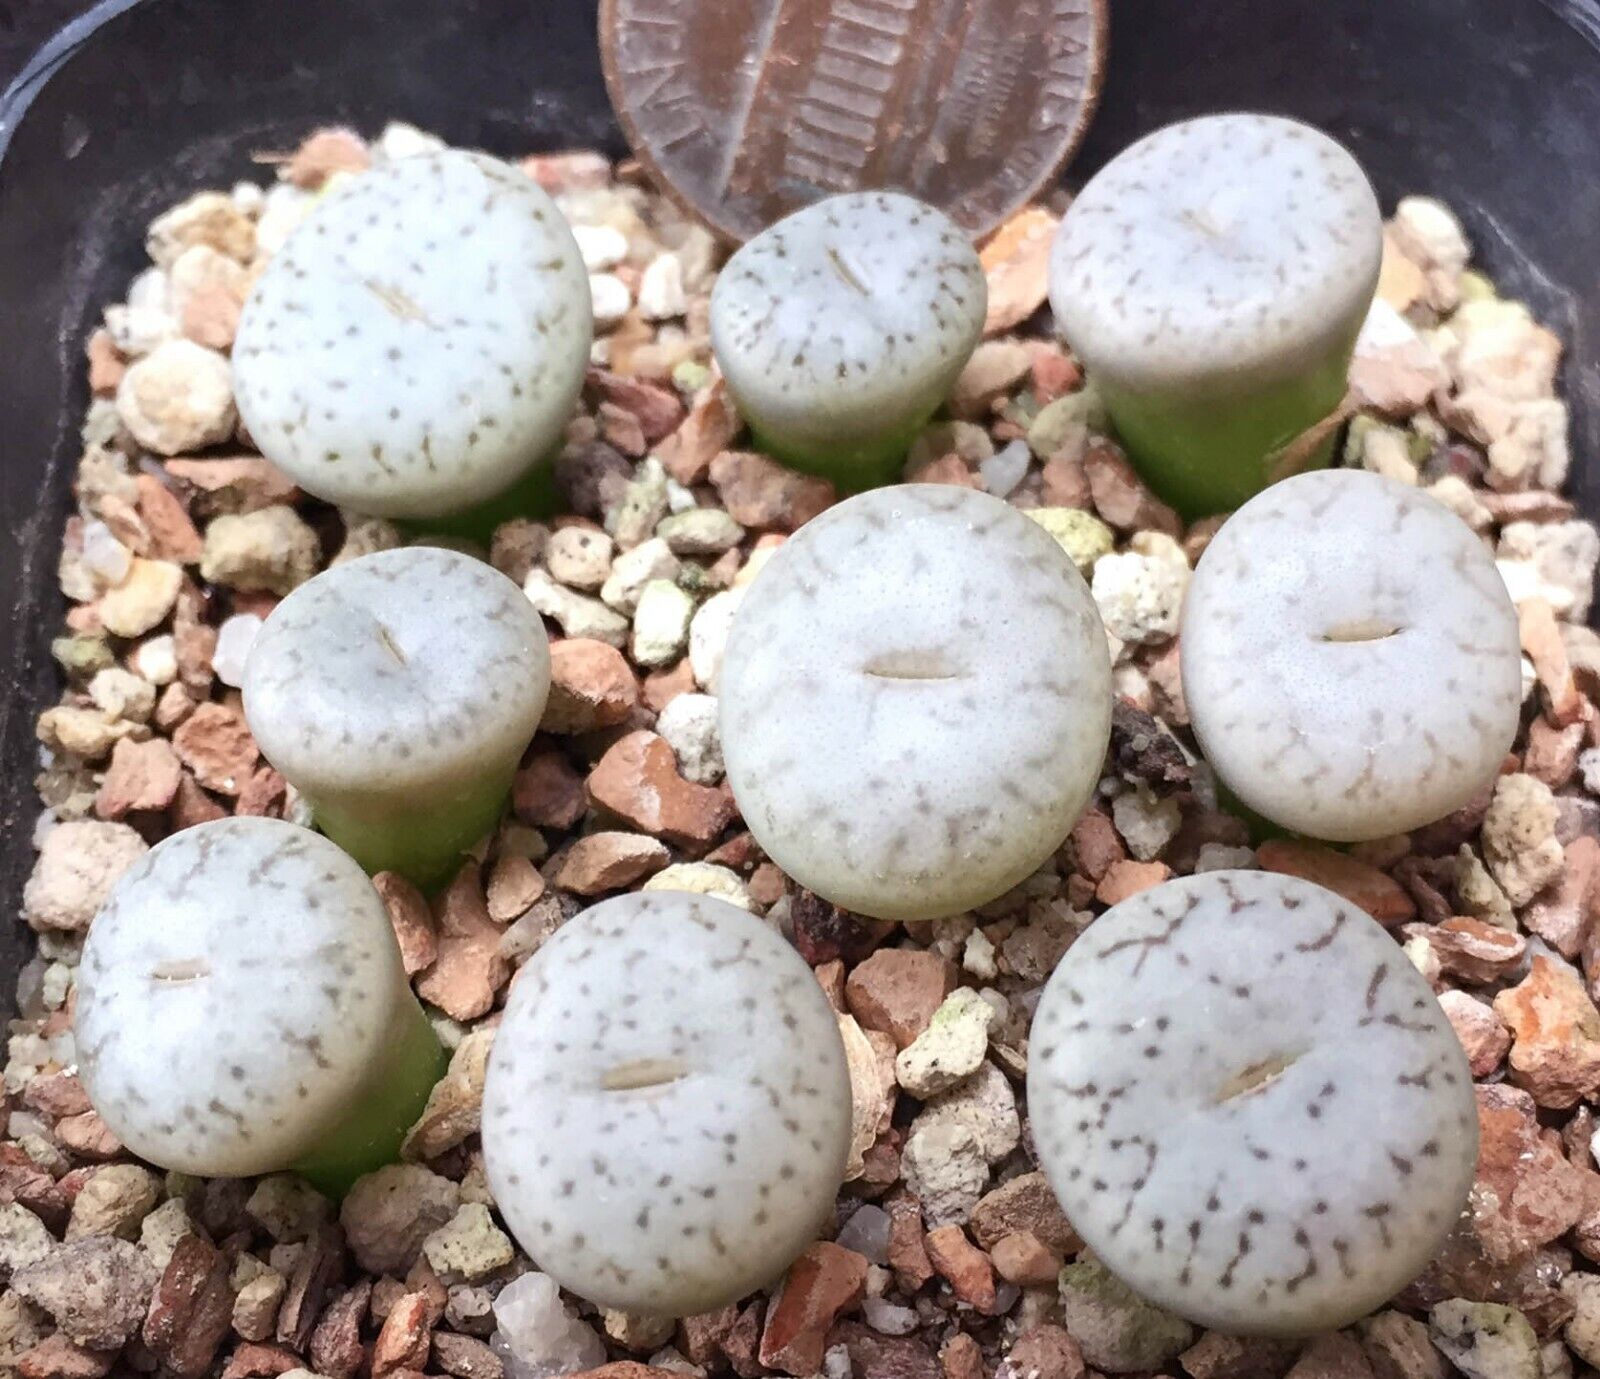 Mesembs Plant--Lithops pseudotruncatella volkii C69--ONE Plant from Group